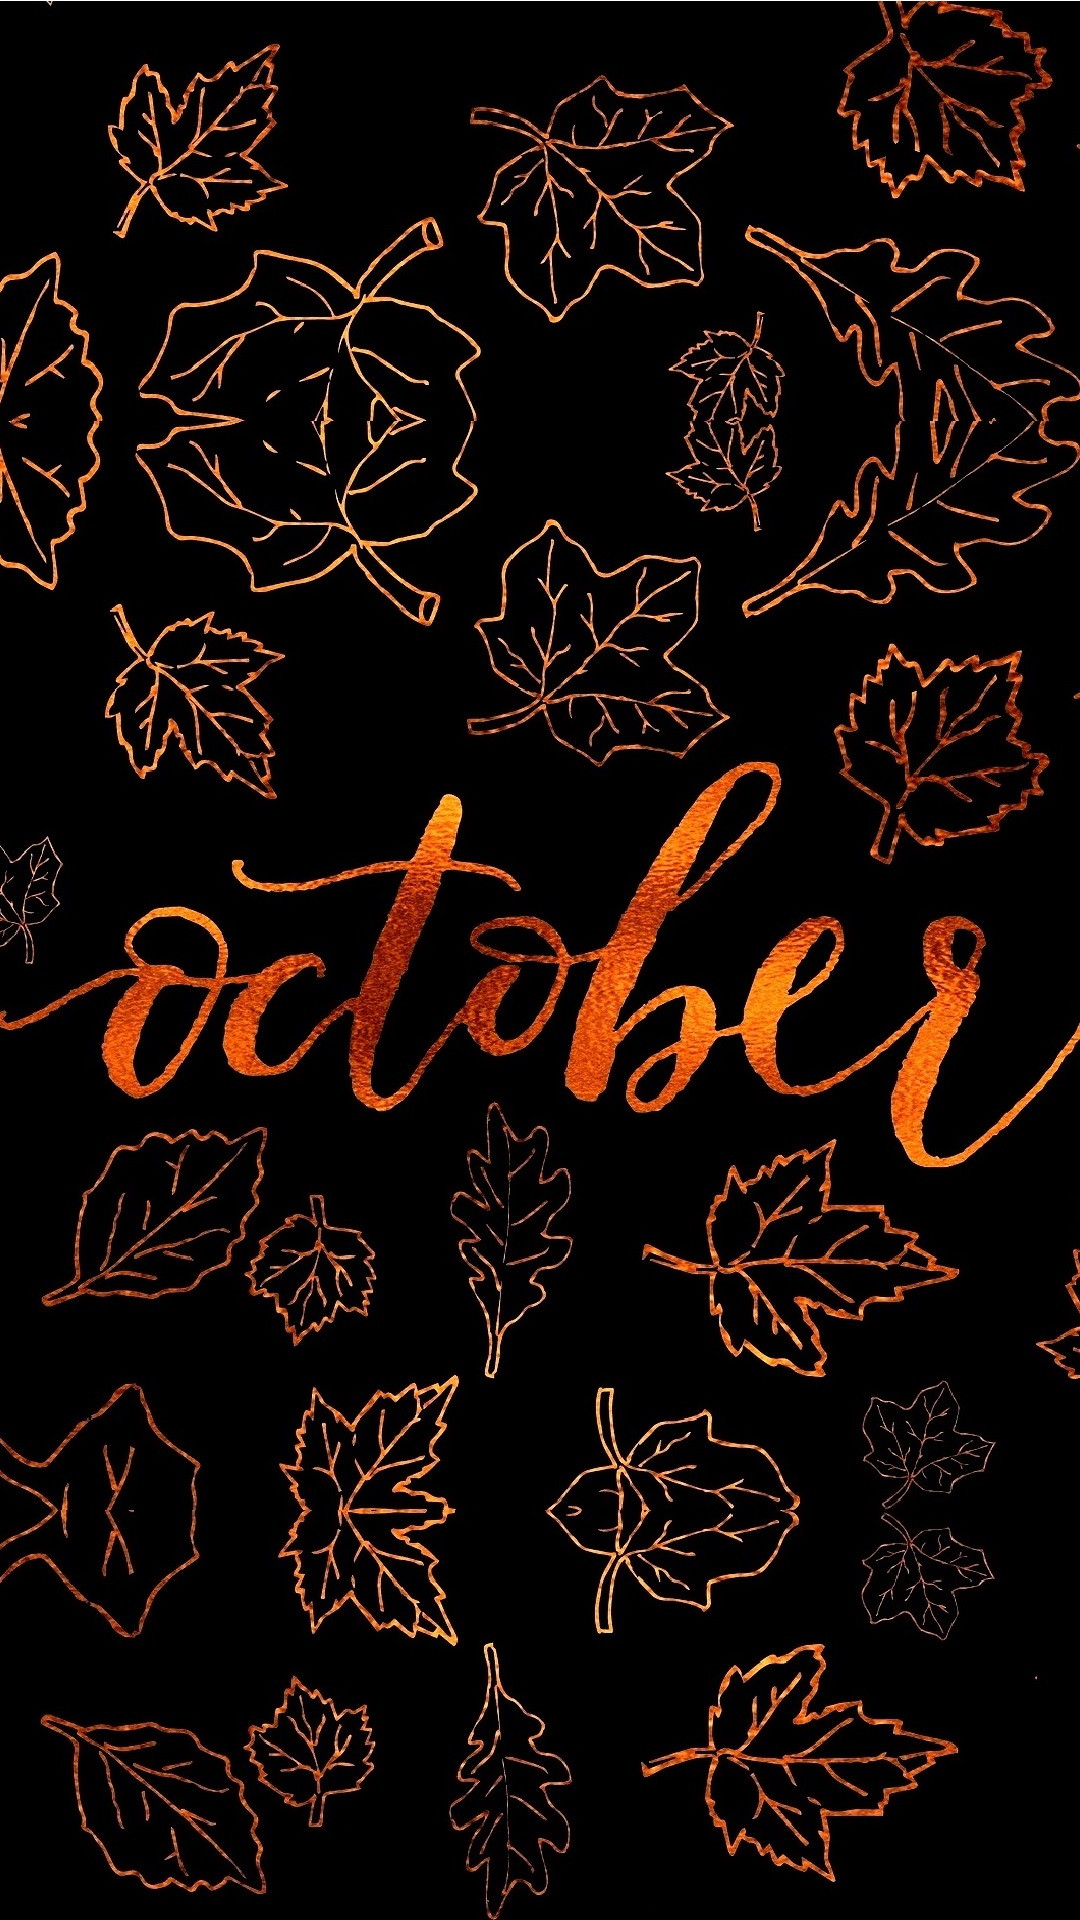 October Android Wallpaper with high-resolution 1080x1920 pixel. You can use this wallpaper for your Android backgrounds, Tablet, Samsung Screensavers, Mobile Phone Lock Screen and another Smartphones device